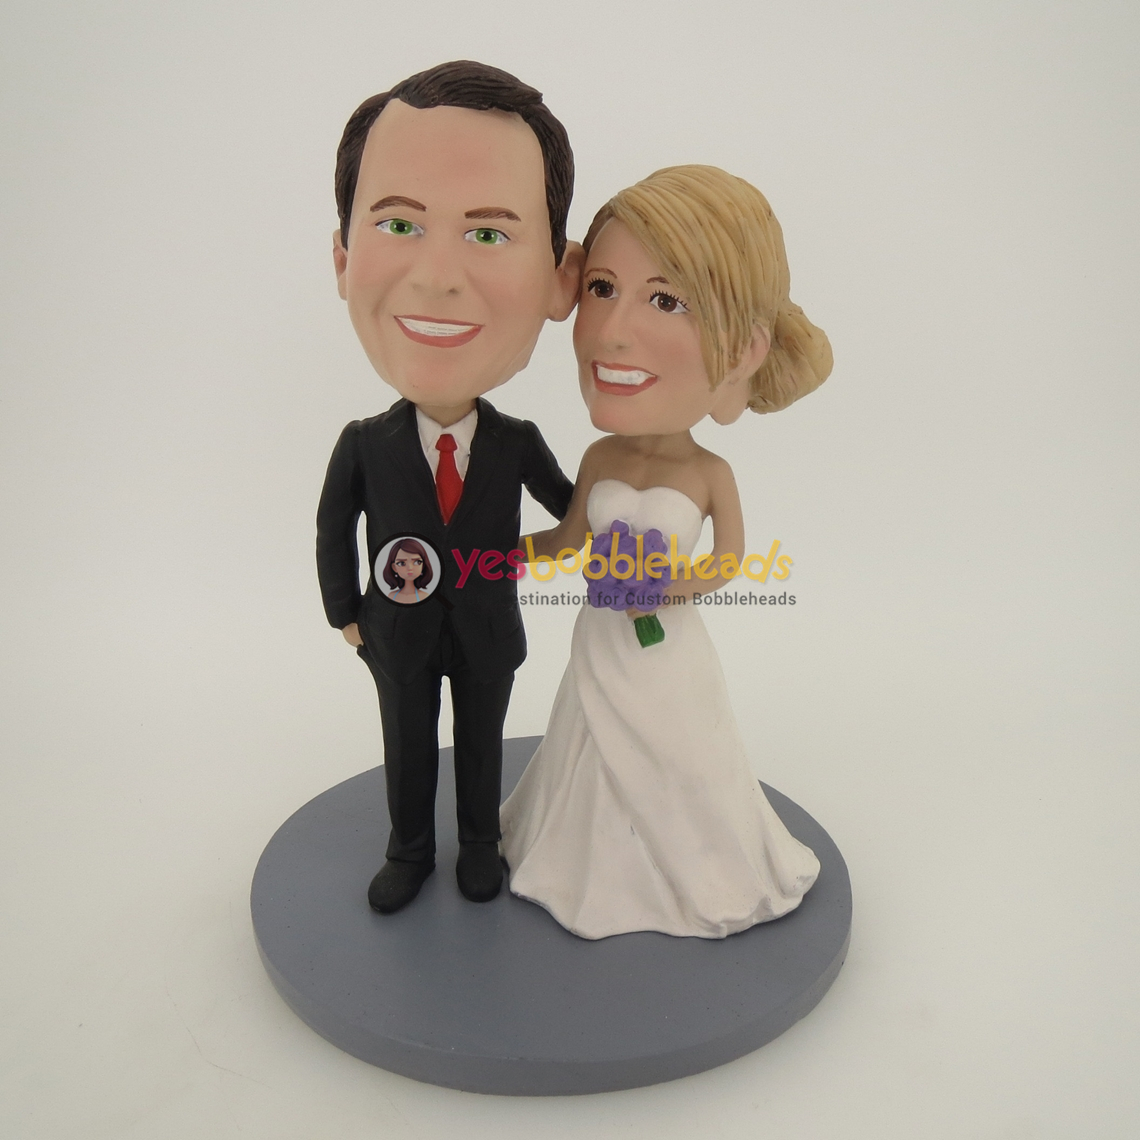 Picture of Custom Bobblehead Doll: Arms Around Each Other Wedding Couple 